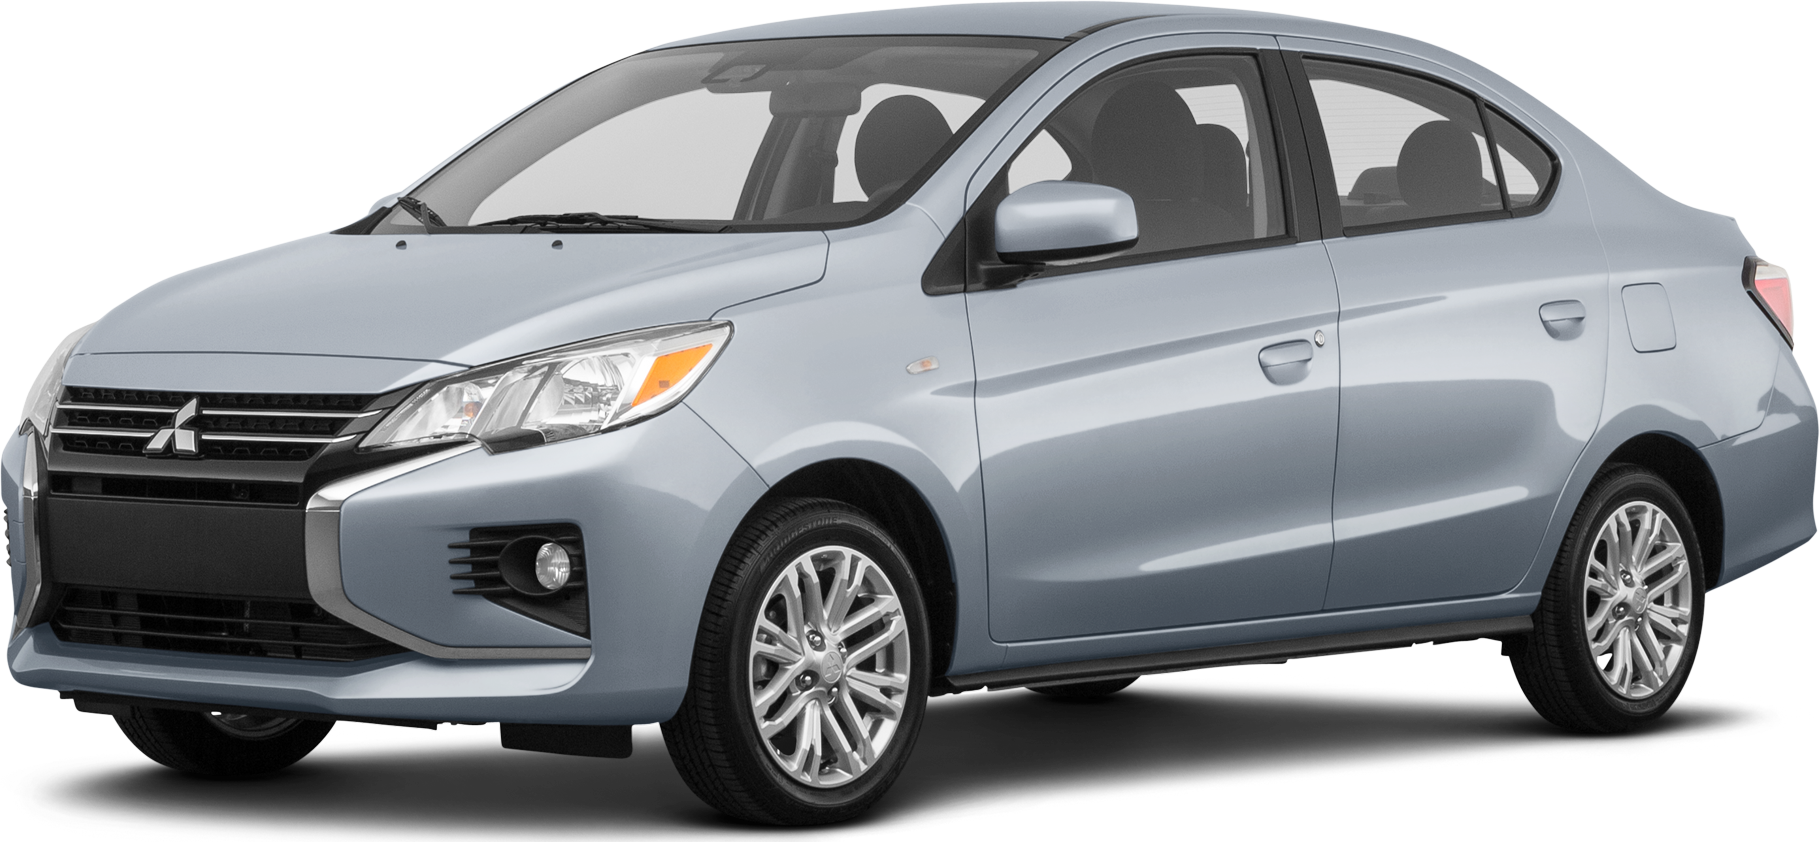 https://file.kelleybluebookimages.com/kbb/base/evox/CP/51689/2024-Mitsubishi-Mirage%20G4-front_51689_032_1820x842_A66_cropped.png